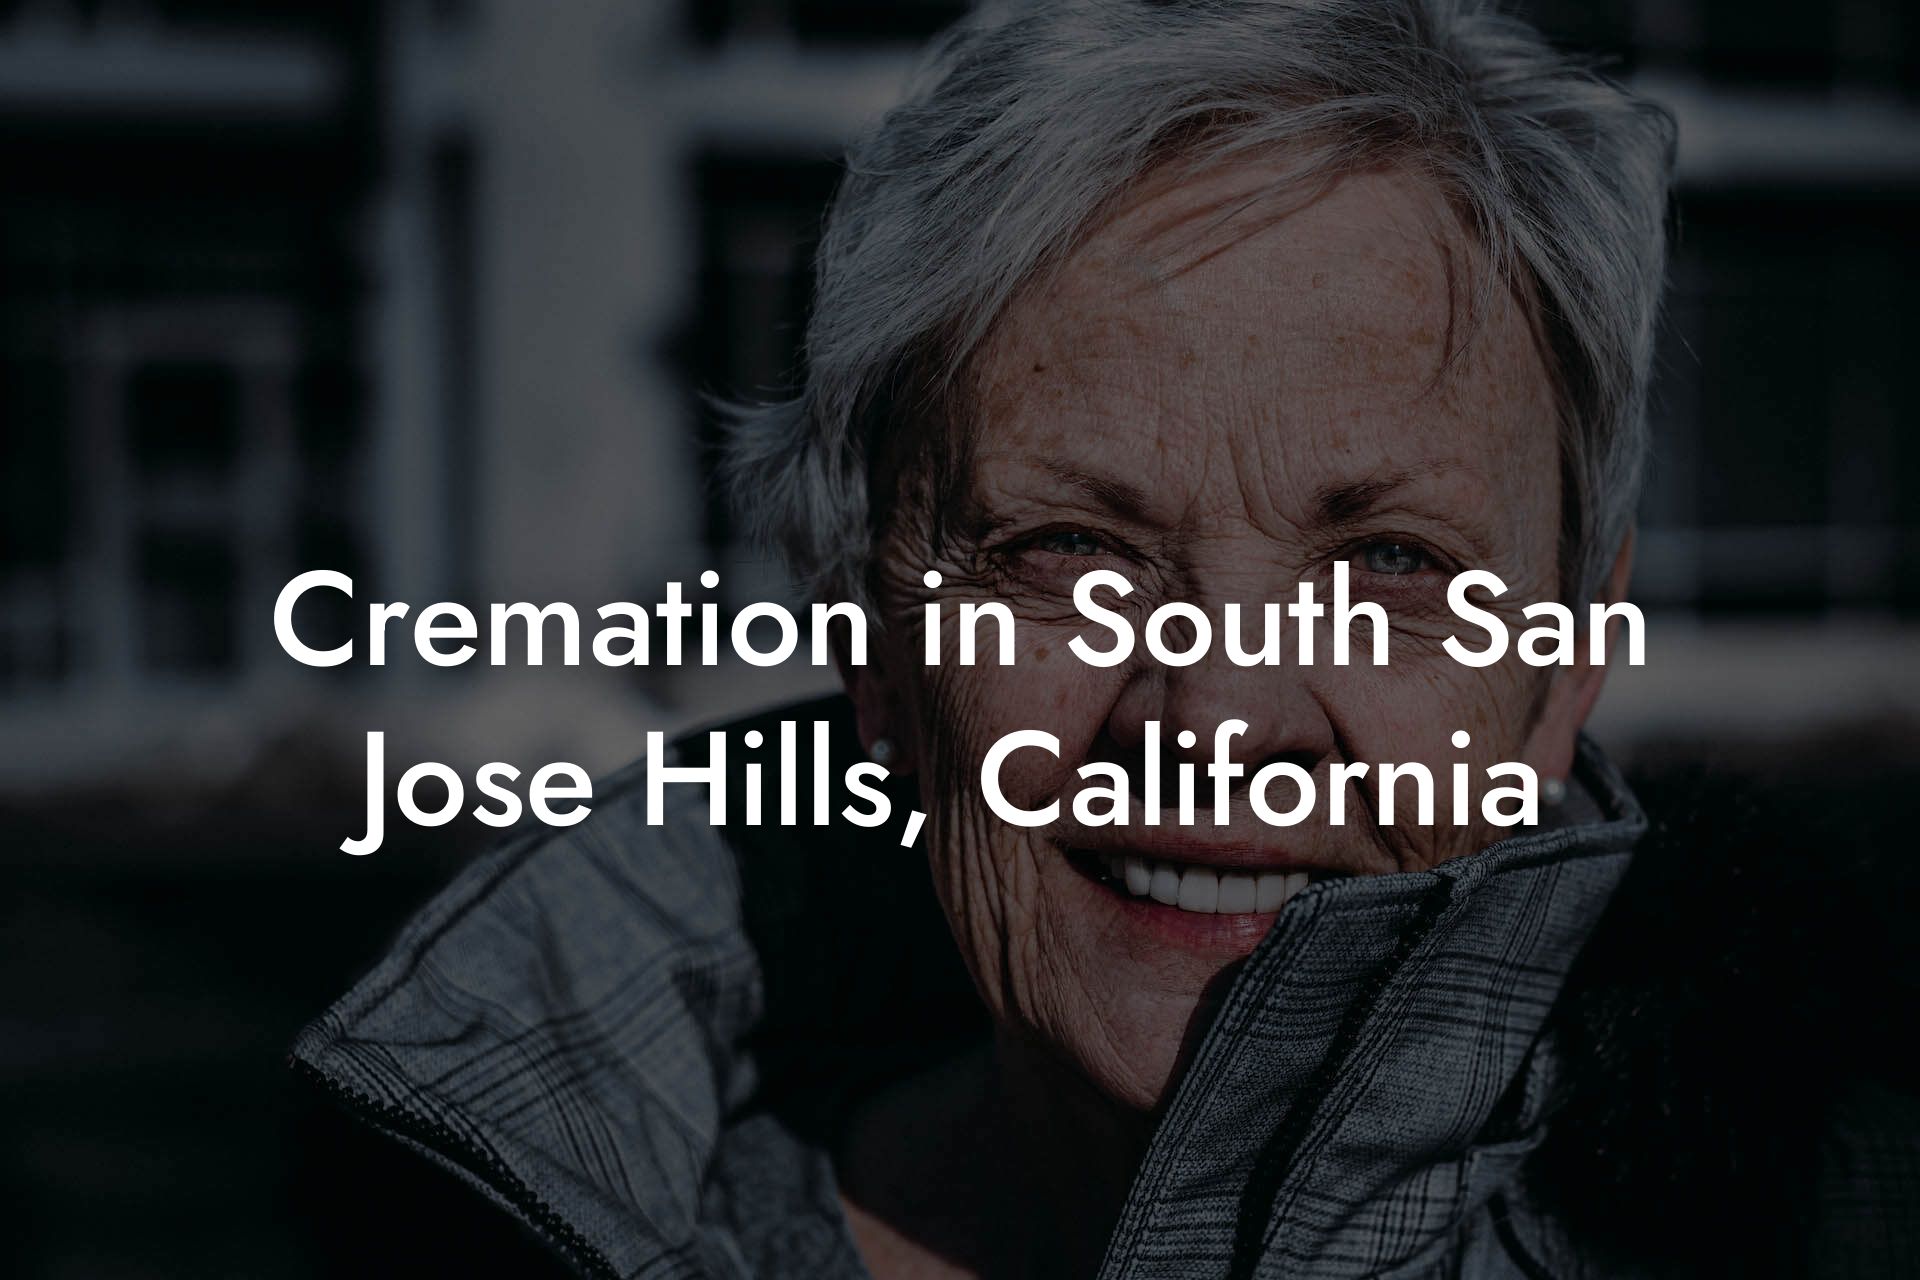 Cremation in South San Jose Hills, California